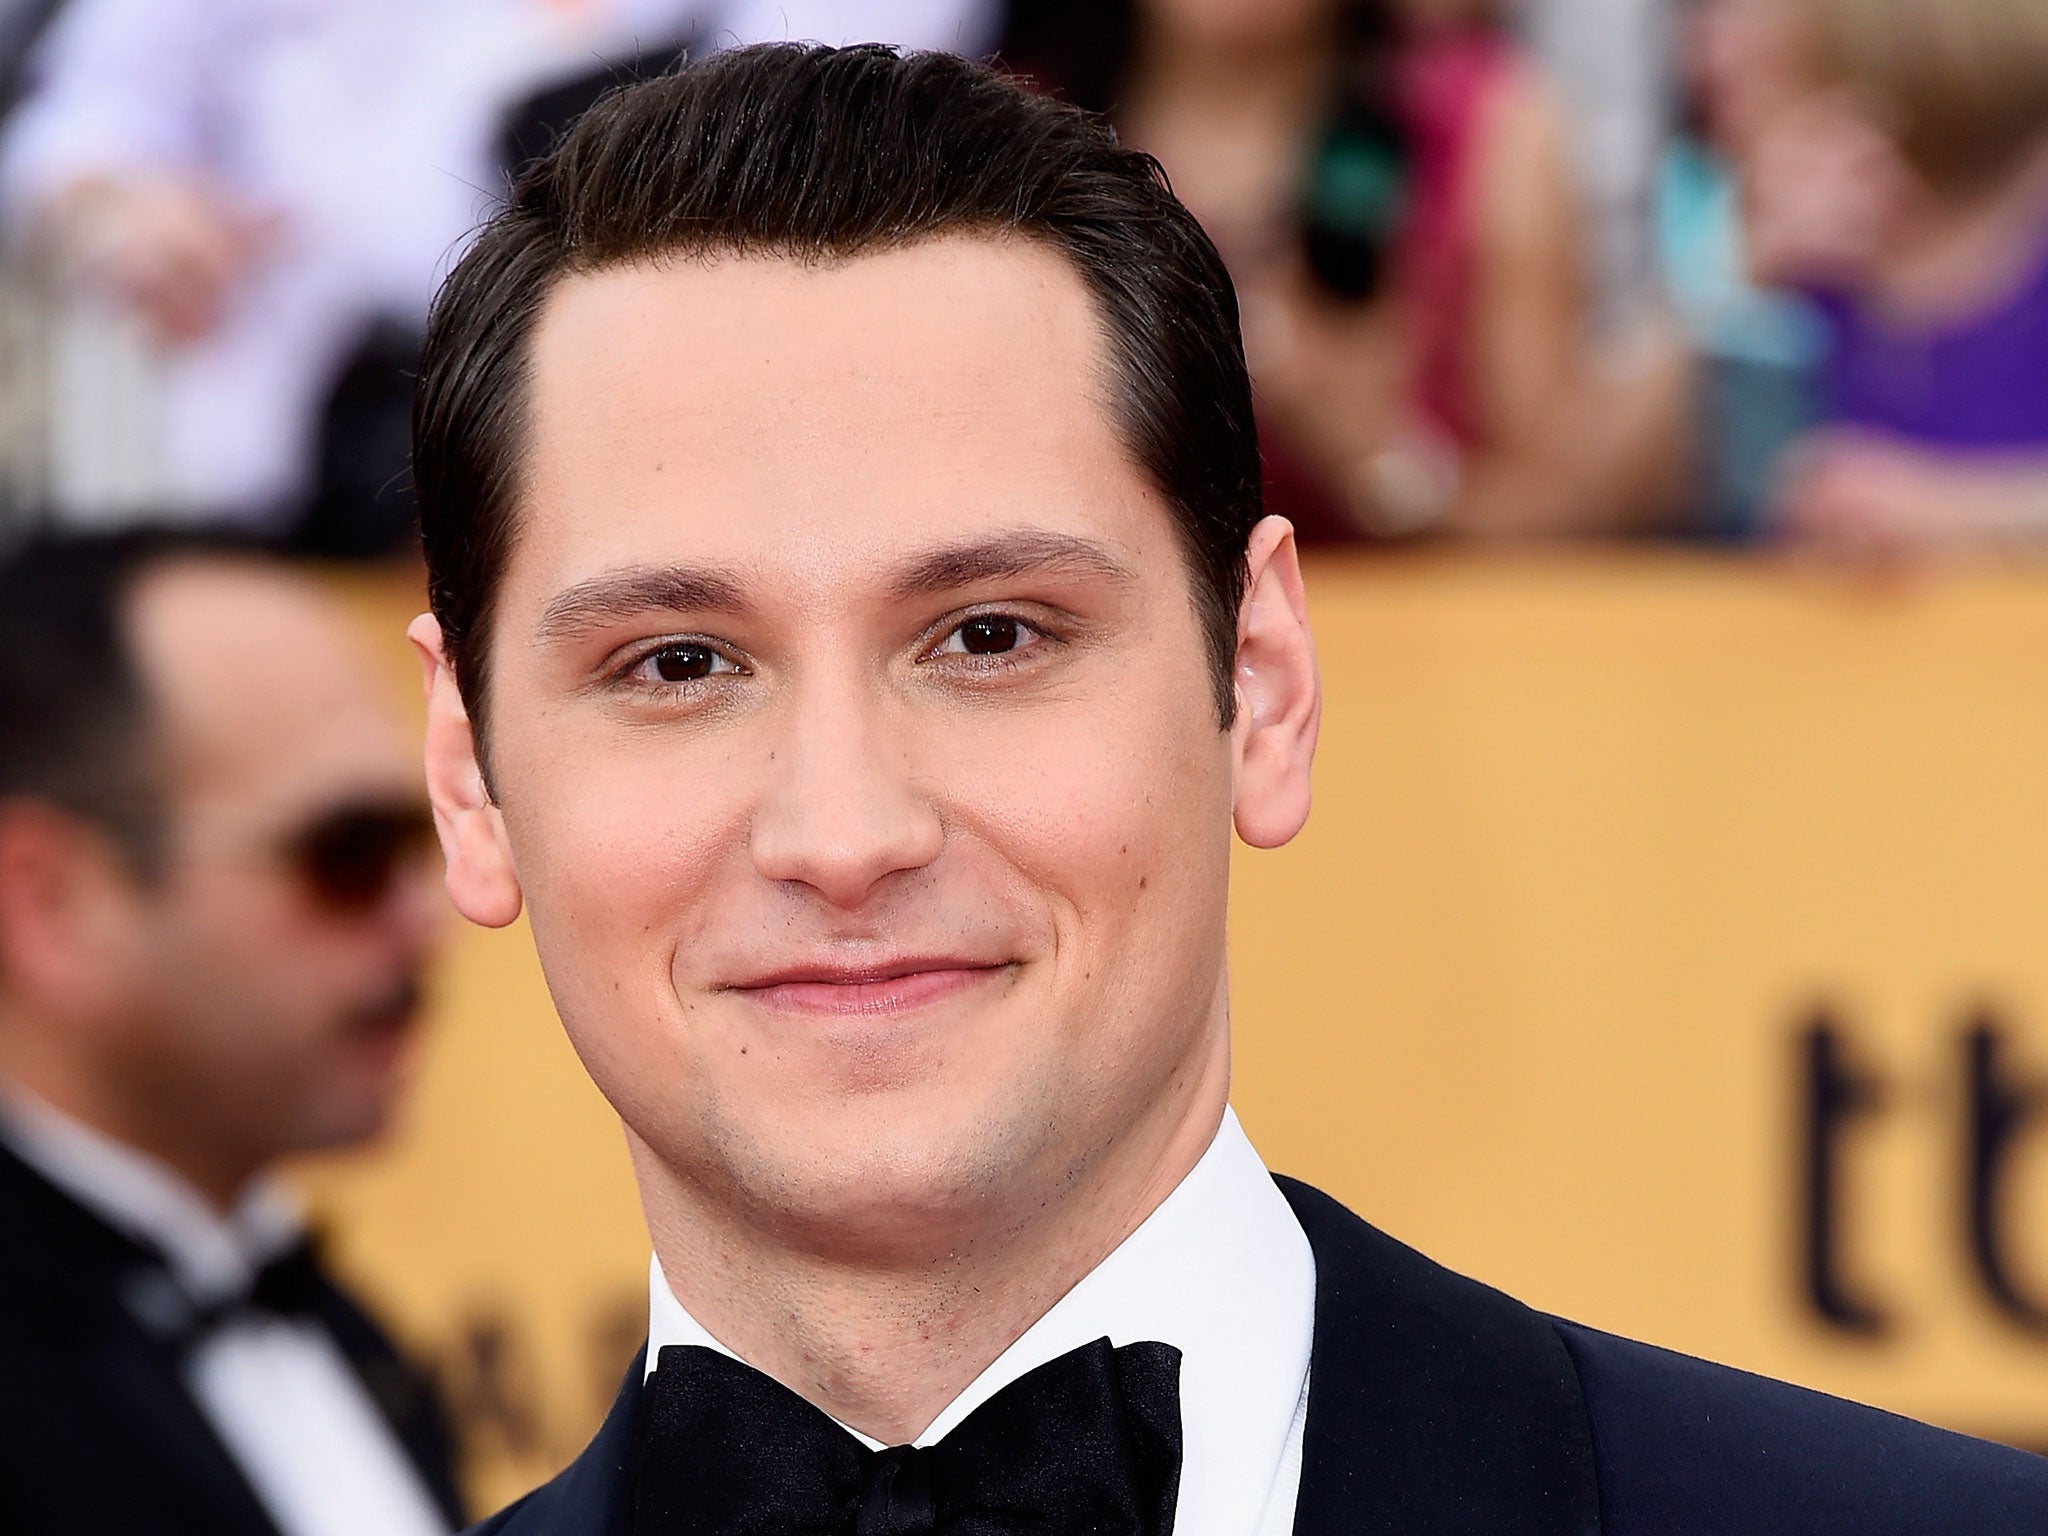 Matt McGorry said he was "embarrassed" to admit that he hadn't previously understood the meaning of the word